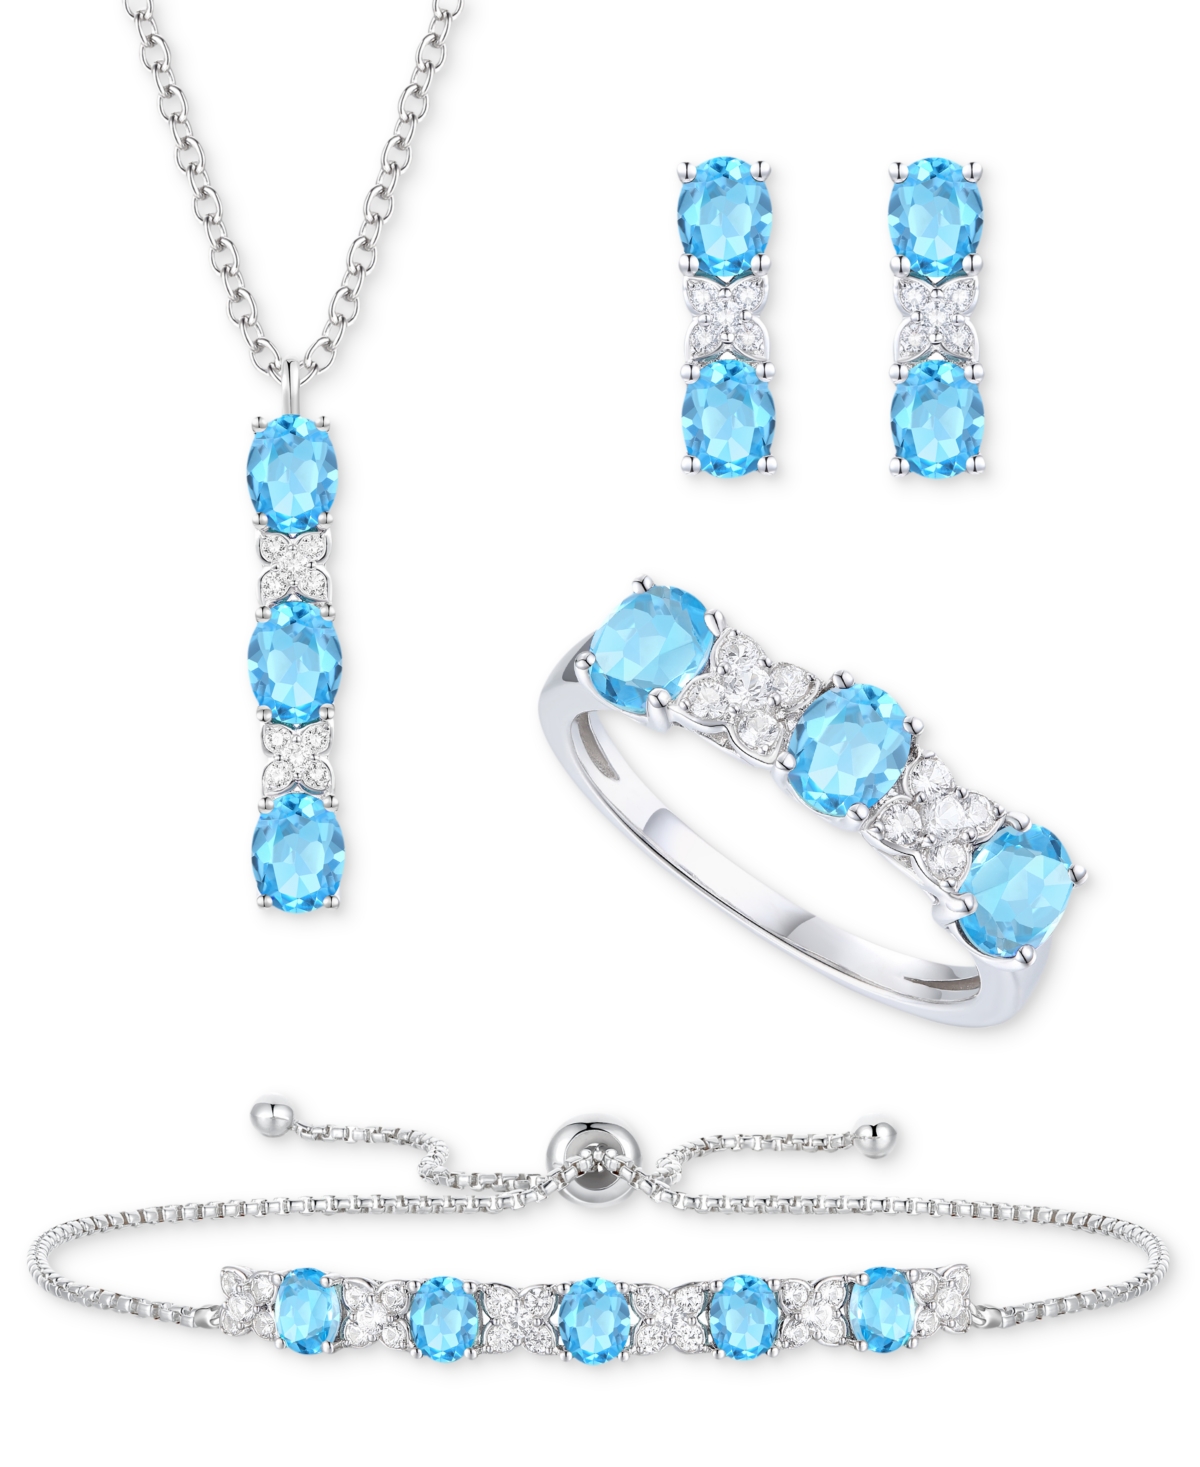 Macy's 5-pc. Set Amethyst (4-5/8 Ct. T.w.) & Lab-grown White Sapphire (3/4 Ct. T.w.) Ring, Pendant Necklace In Blue Topaz